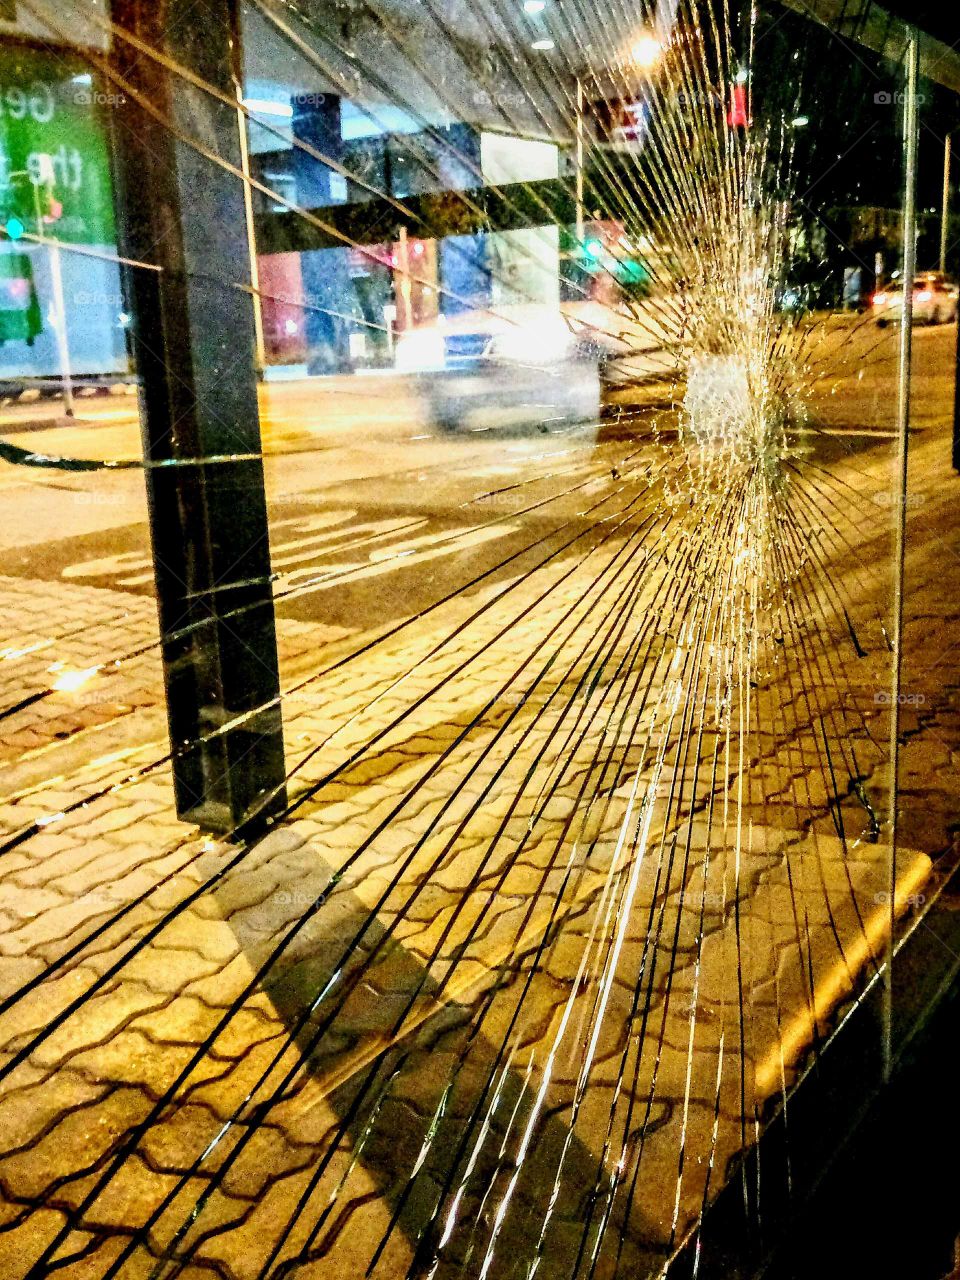 passing vehicle shot through shattered glass of bus shelter